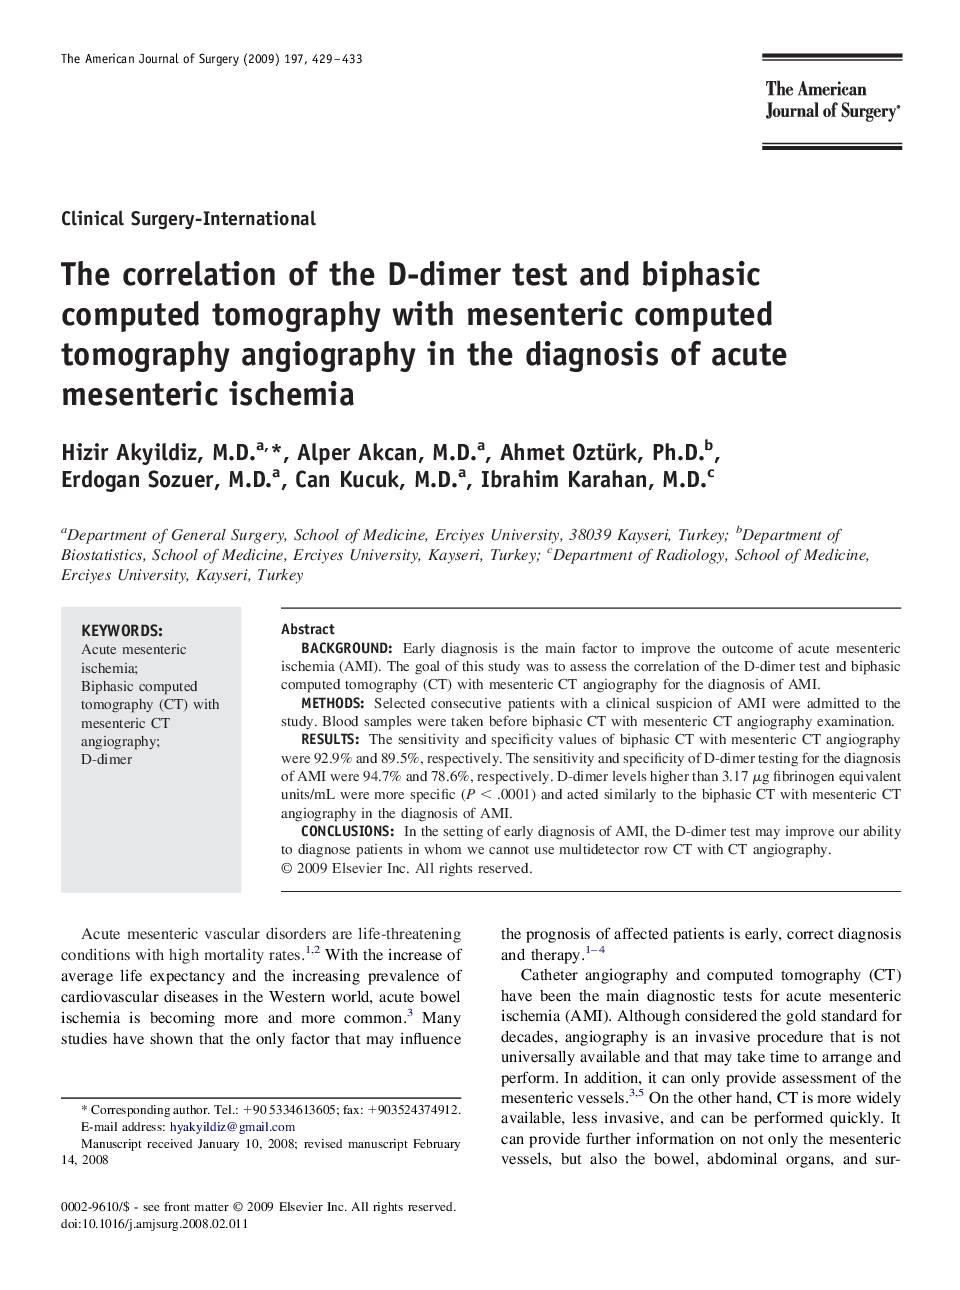 The correlation of the D-dimer test and biphasic computed tomography with mesenteric computed tomography angiography in the diagnosis of acute mesenteric ischemia